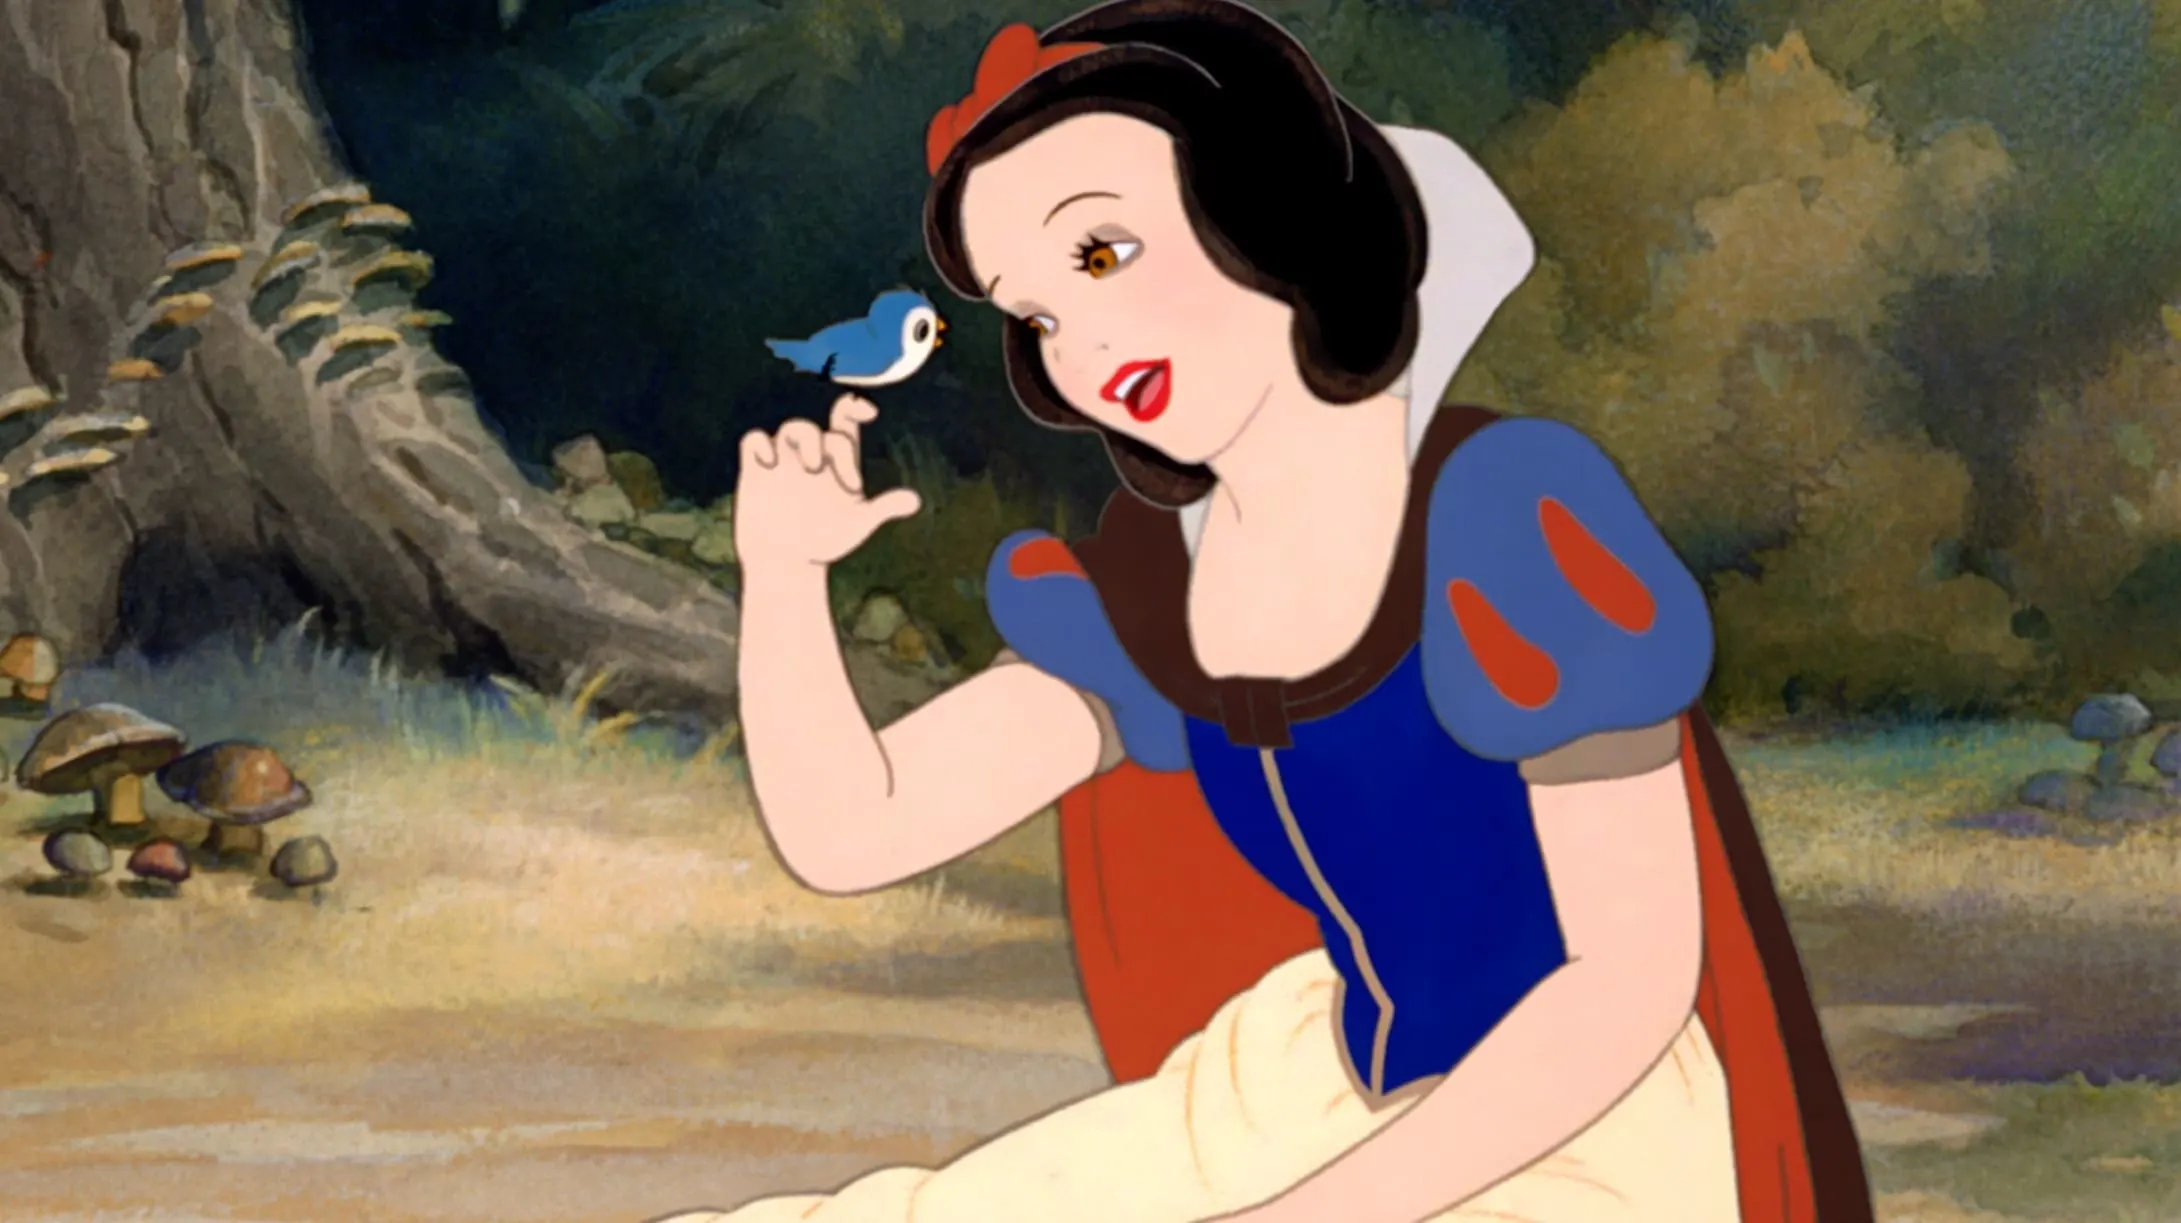 Snow White, Disney characters starting with S